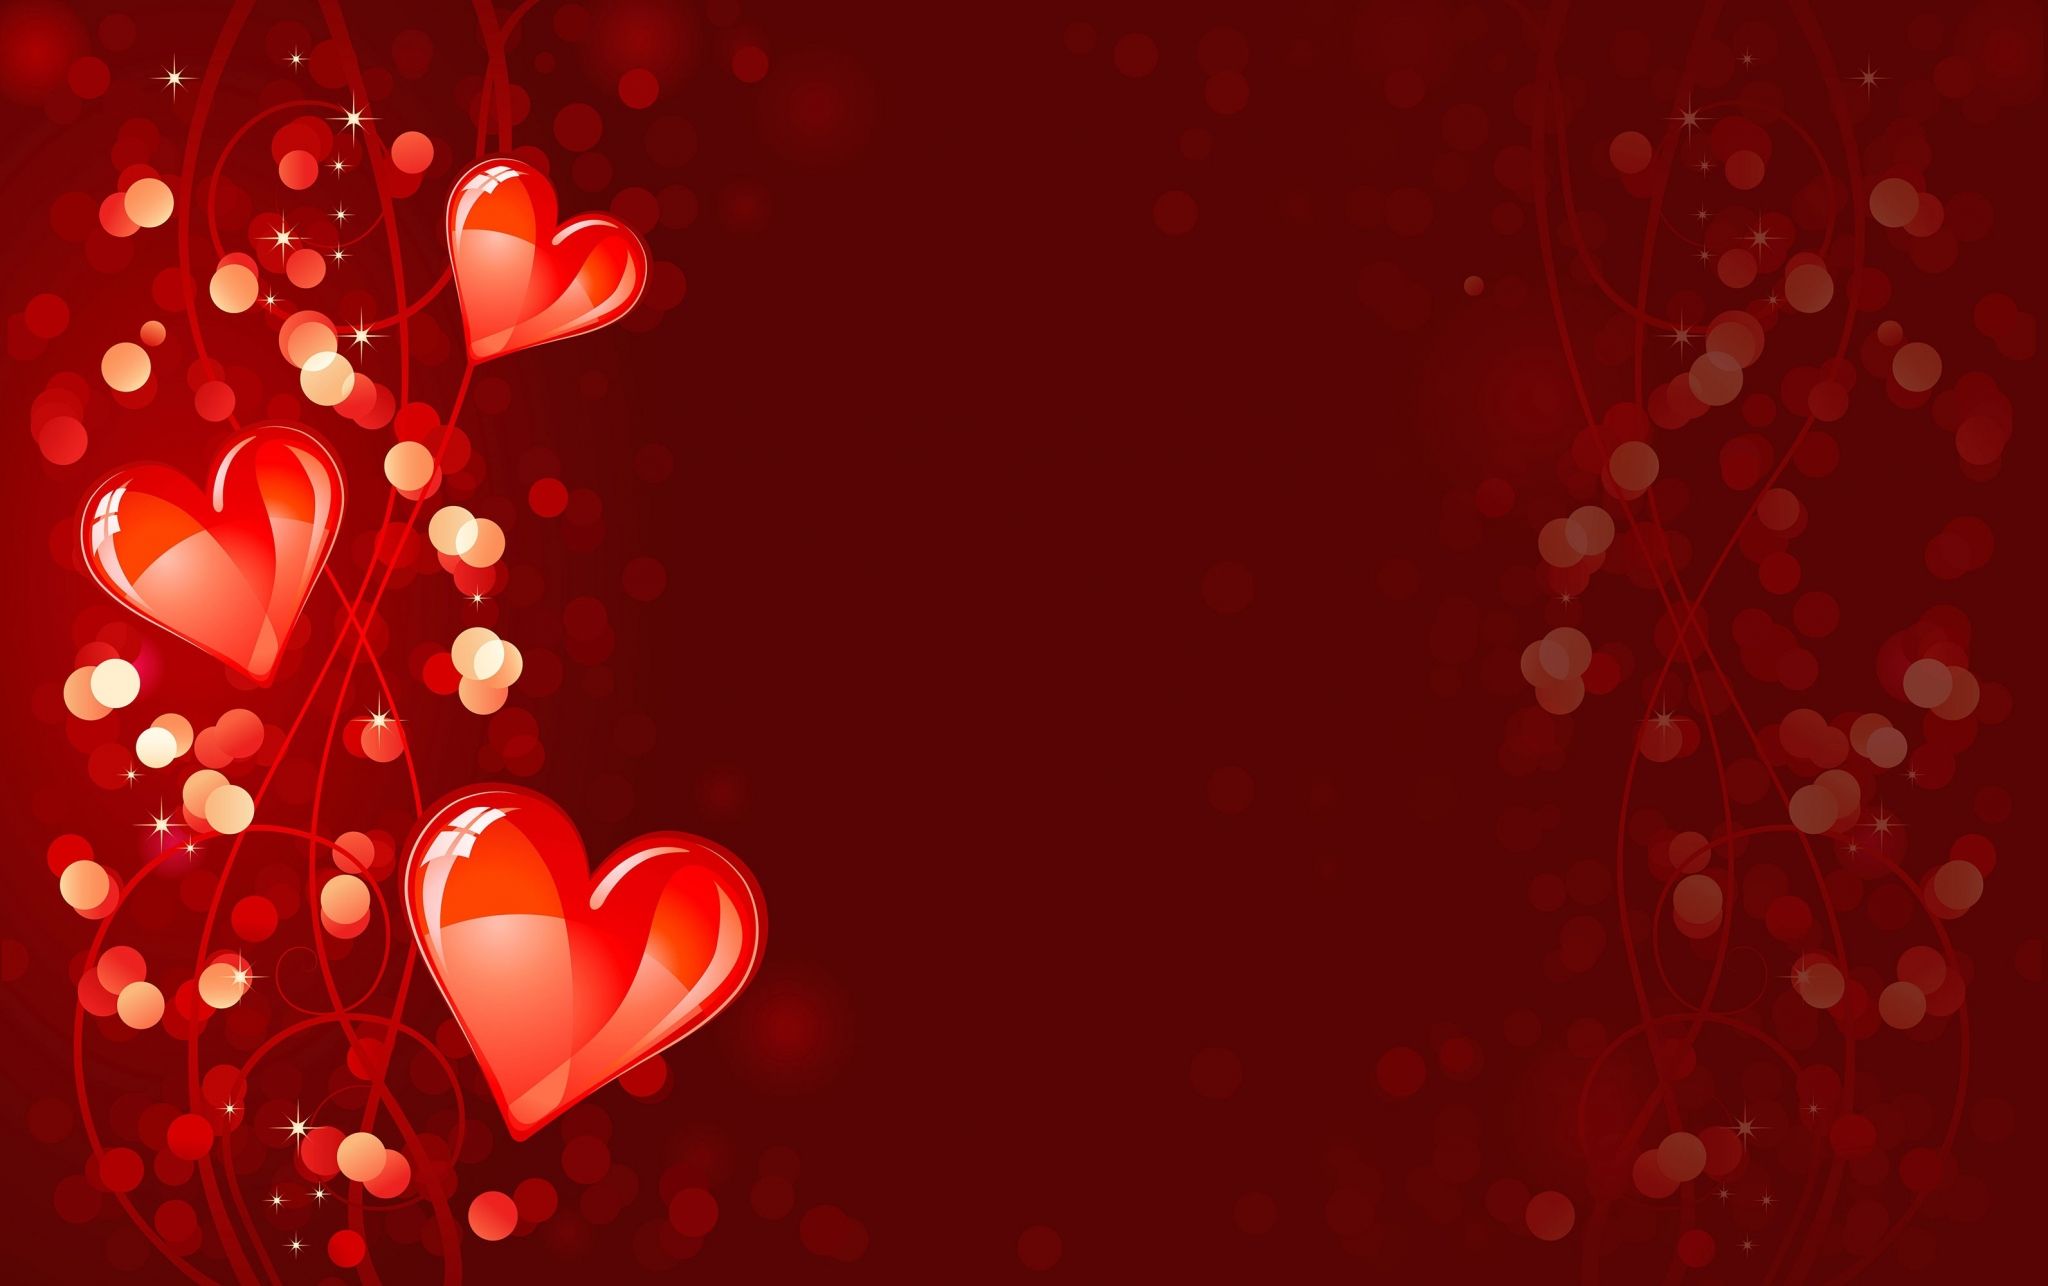 Valentines day wallpaper pack p hd valentines wallpaper valentines day background valentines wallpaper iphone